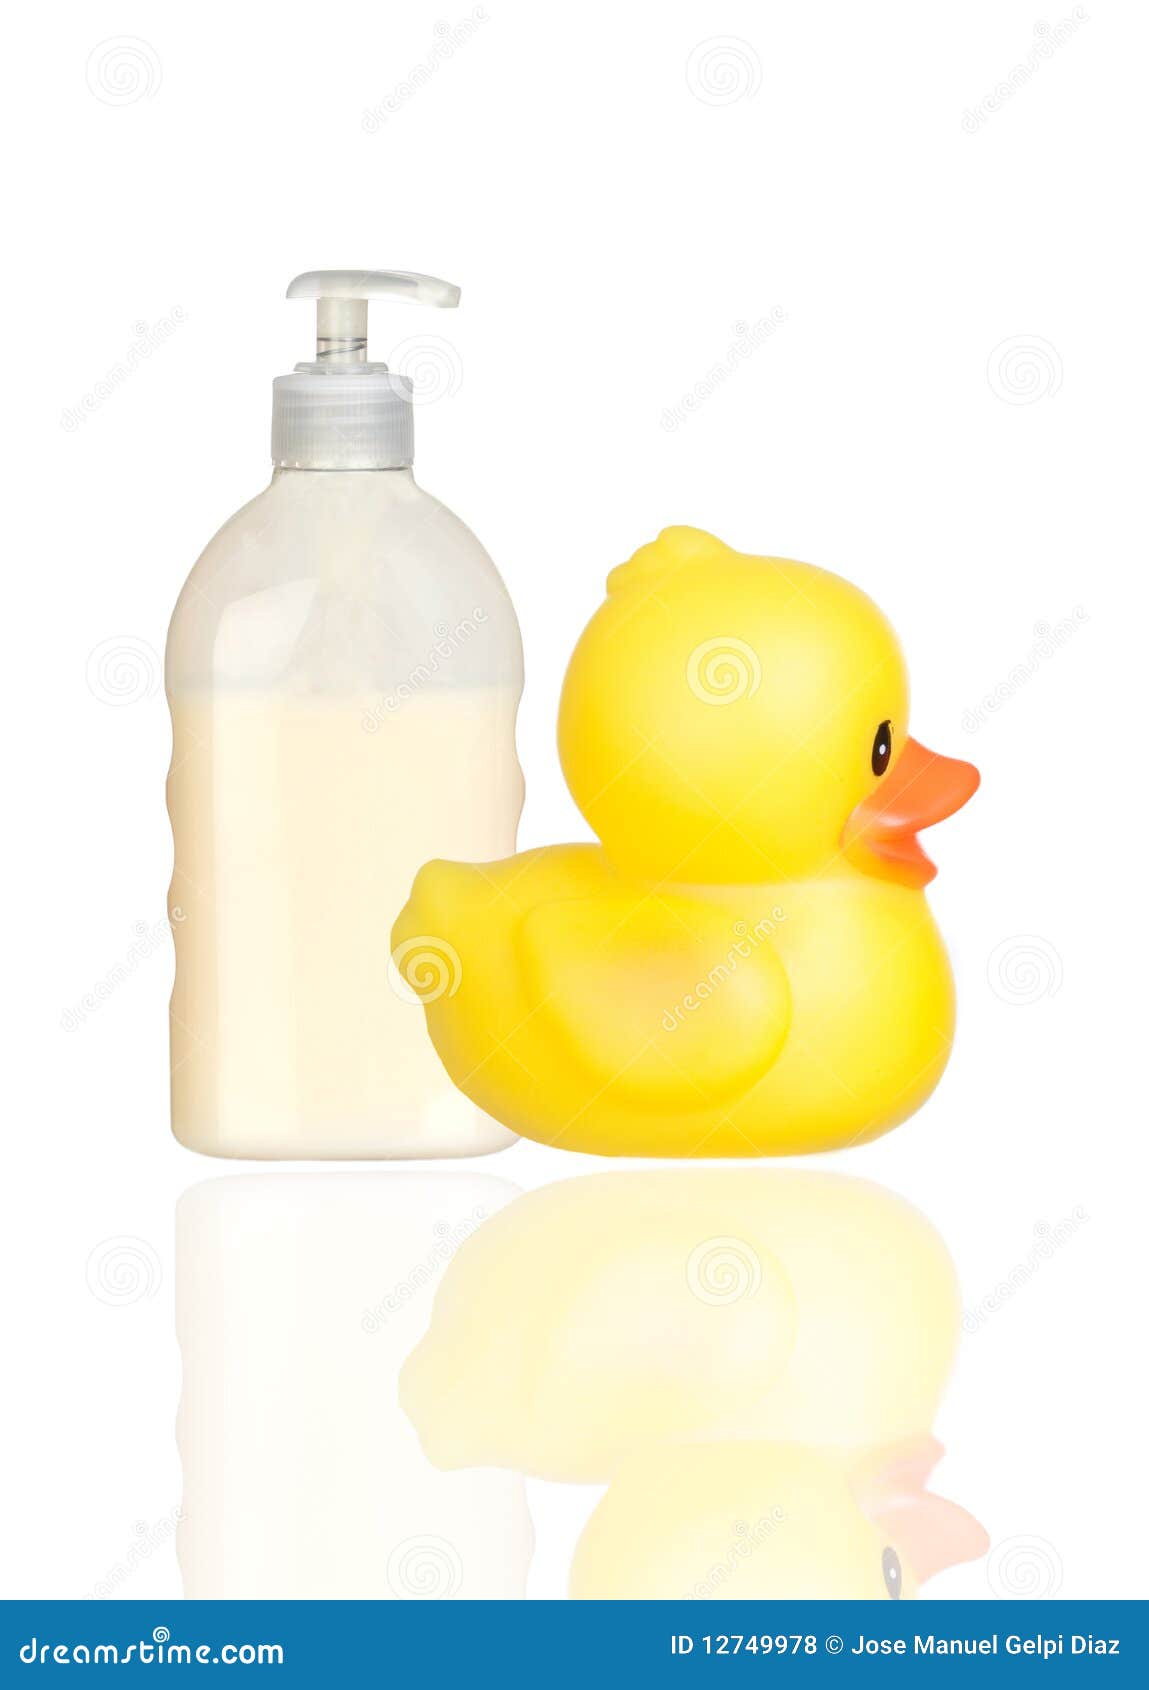 Royalty Free Stock Photos: Yellow plastic duck and boat bath dispenser 